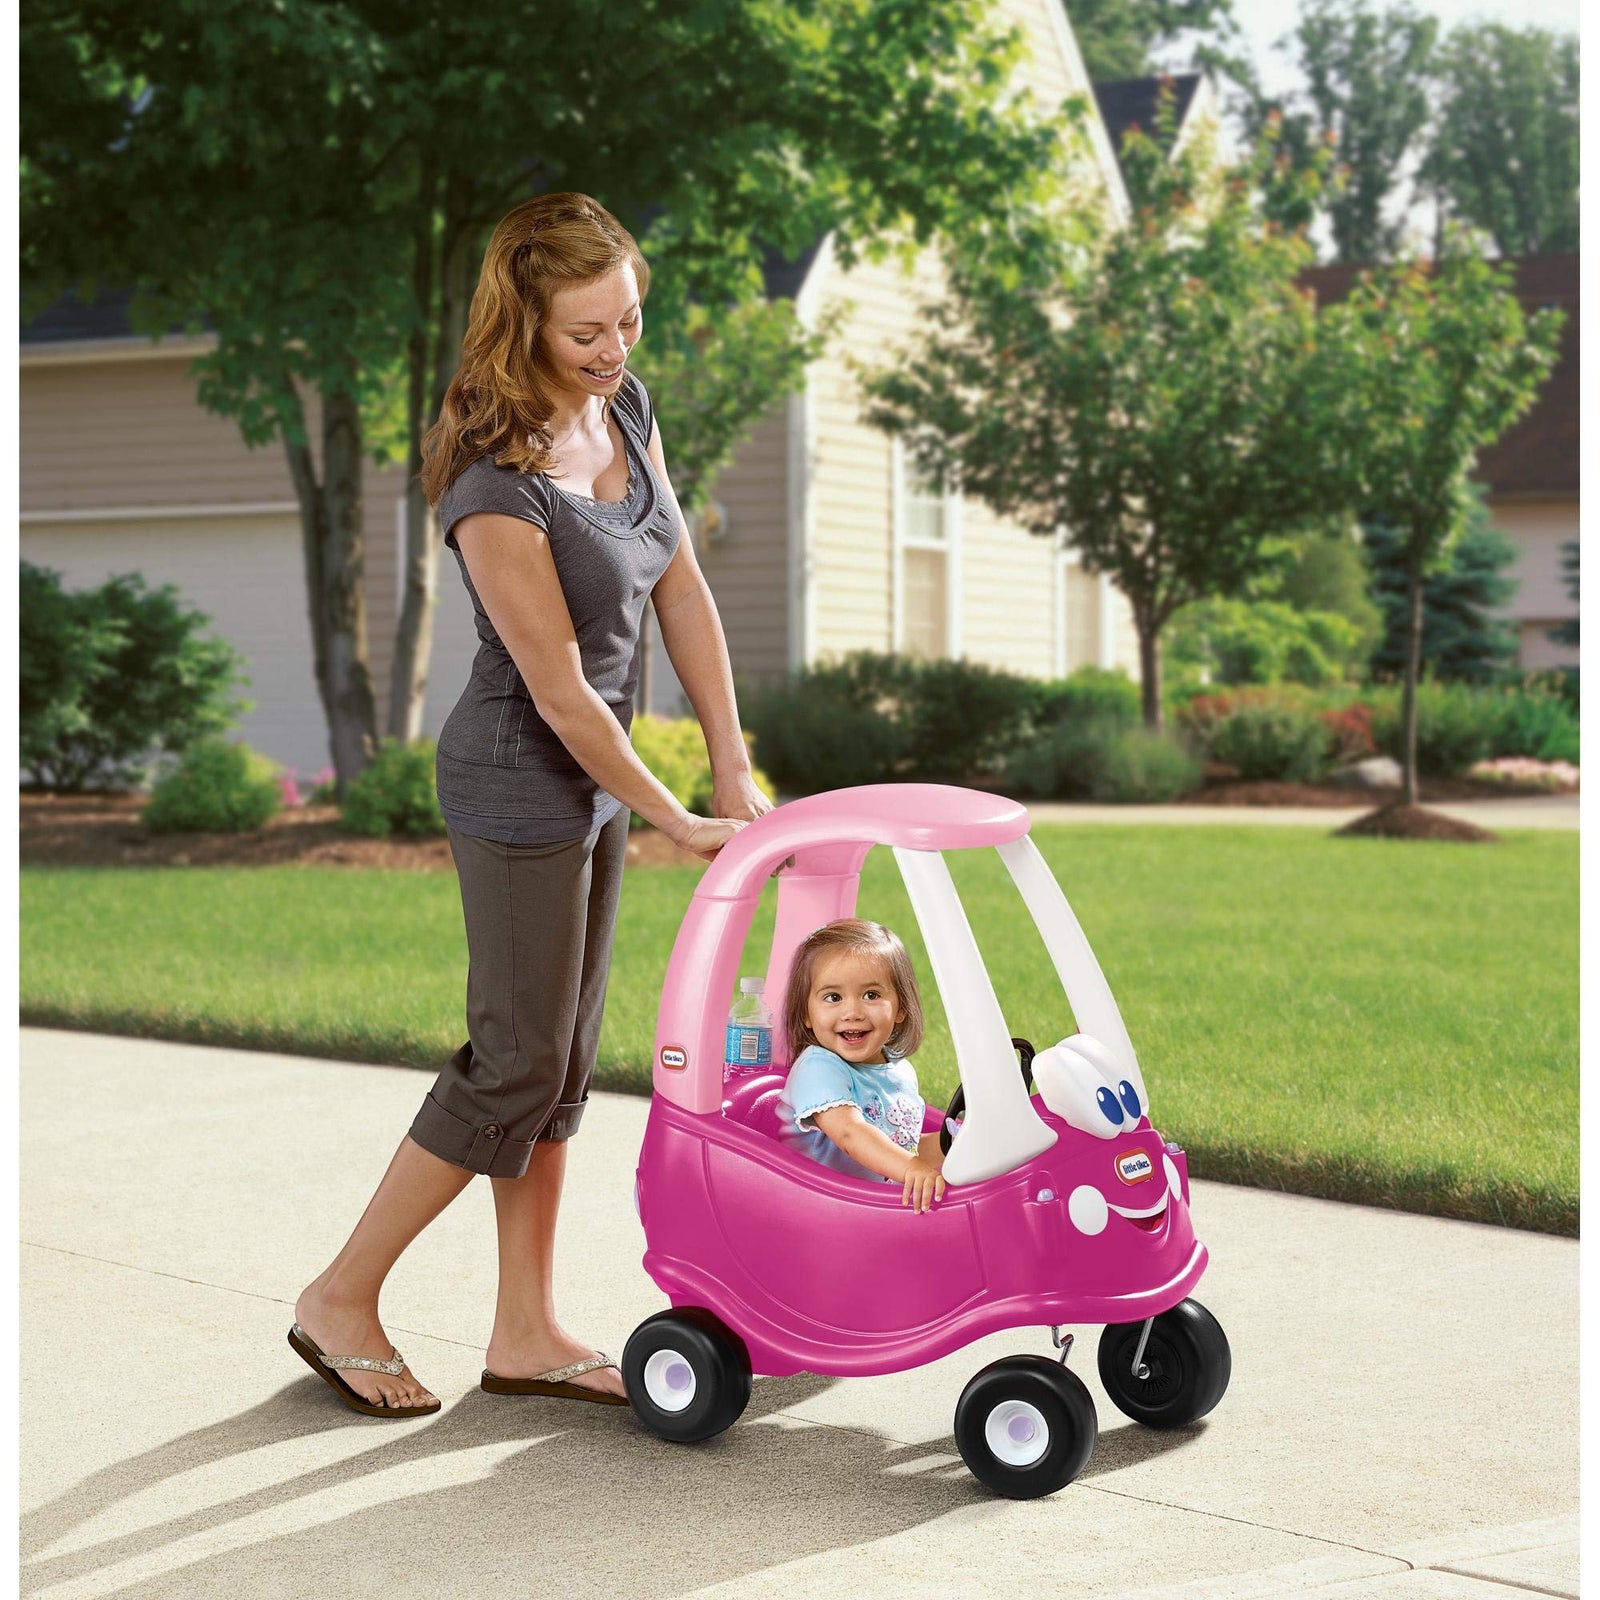 Little Tikes Princess Cozy Coupe Ride-On Toy - Toddler Car Push and Buggy Includes Working Doors, Steering Wheel, Horn, Gas Cap, Ignition Switch - For Boys and Girls Active Play , Pink